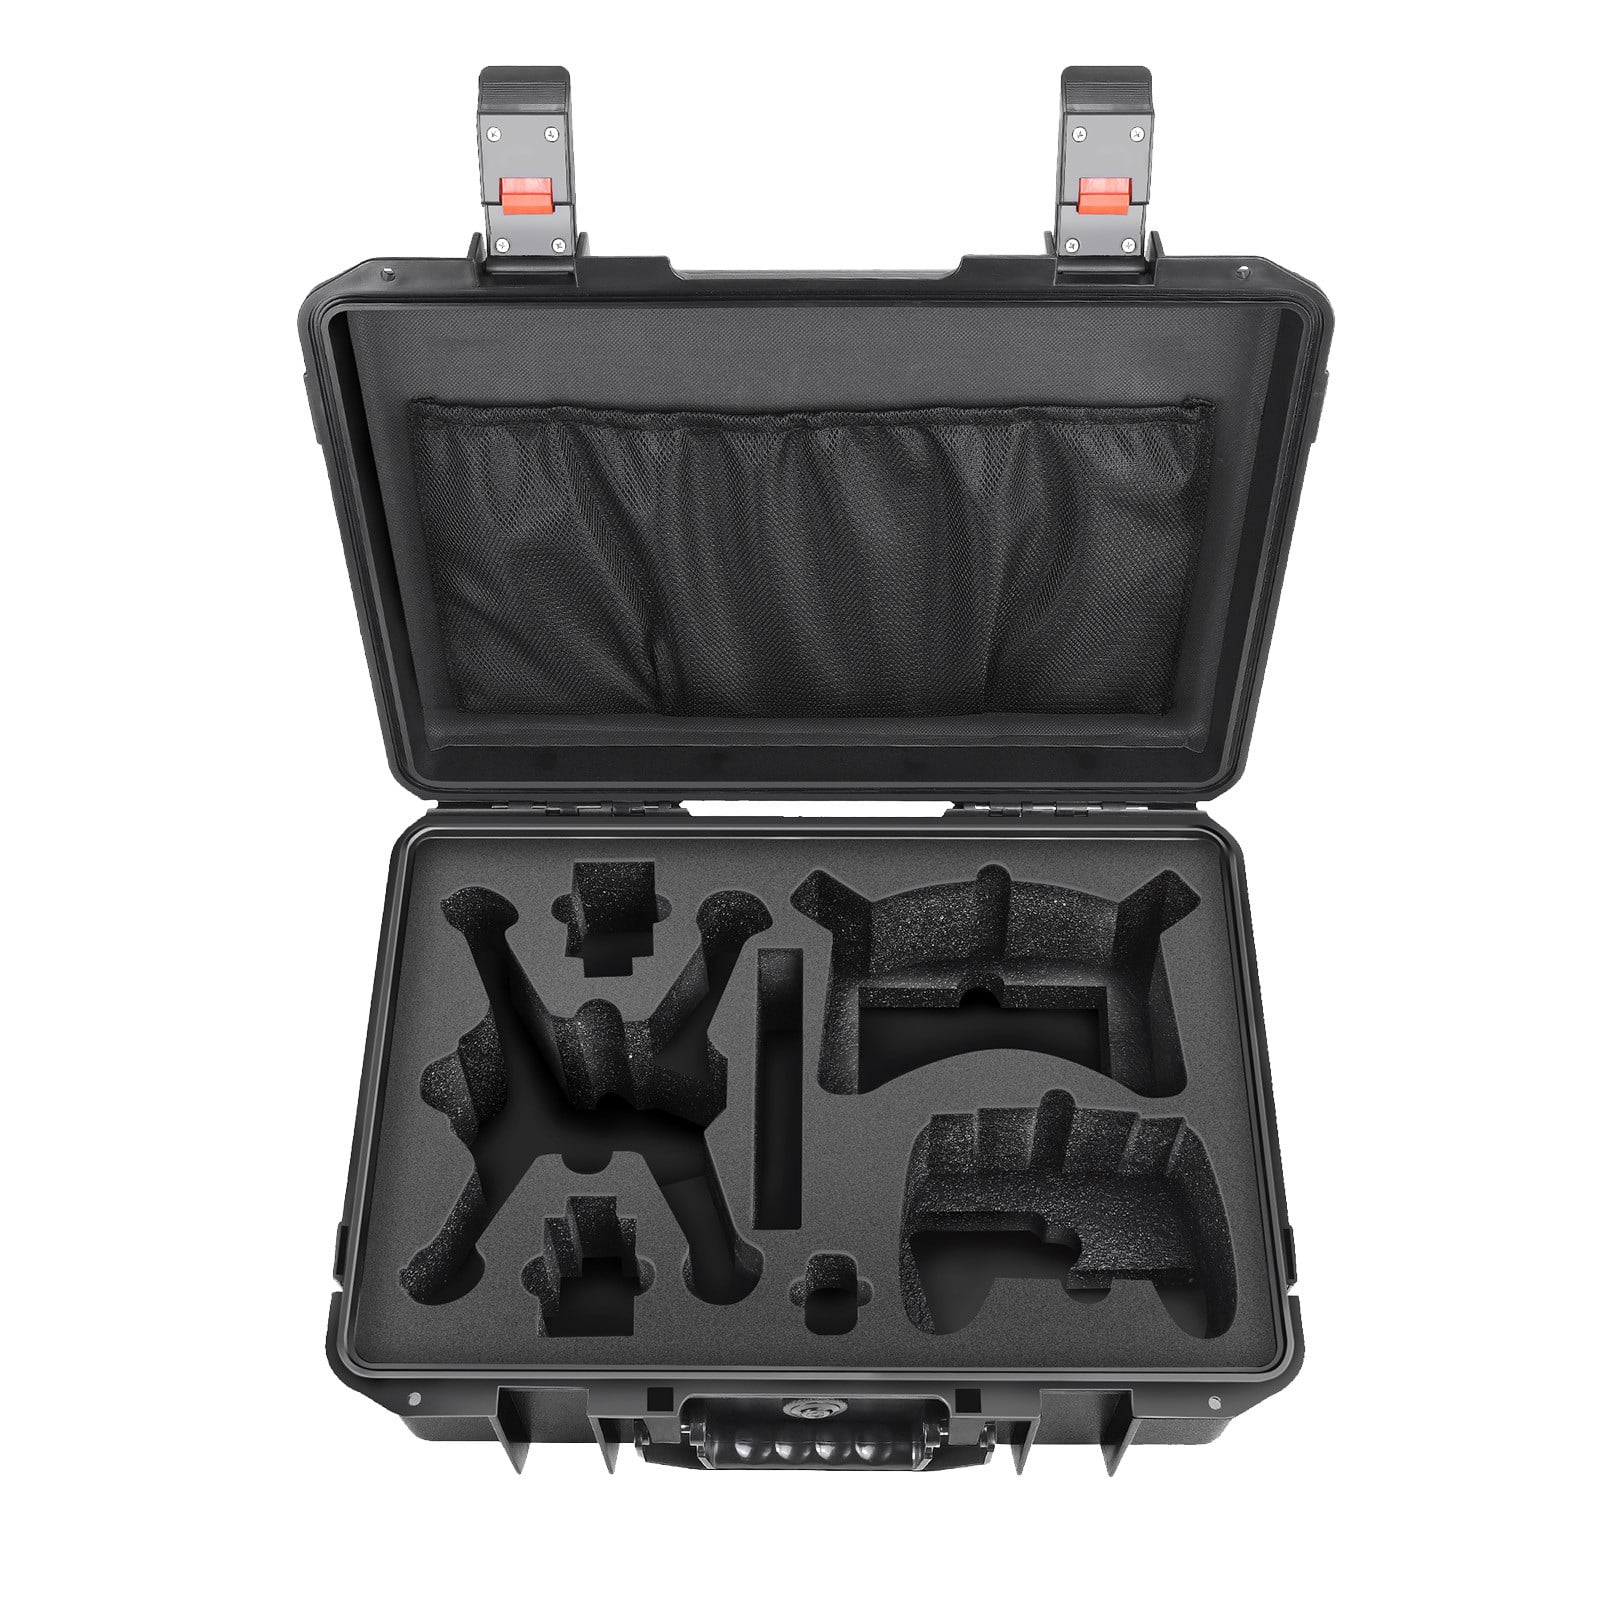 Details about   For DJI FPV Combo Drone Waterproof Storage Carrying Bags Case Box Backpack 